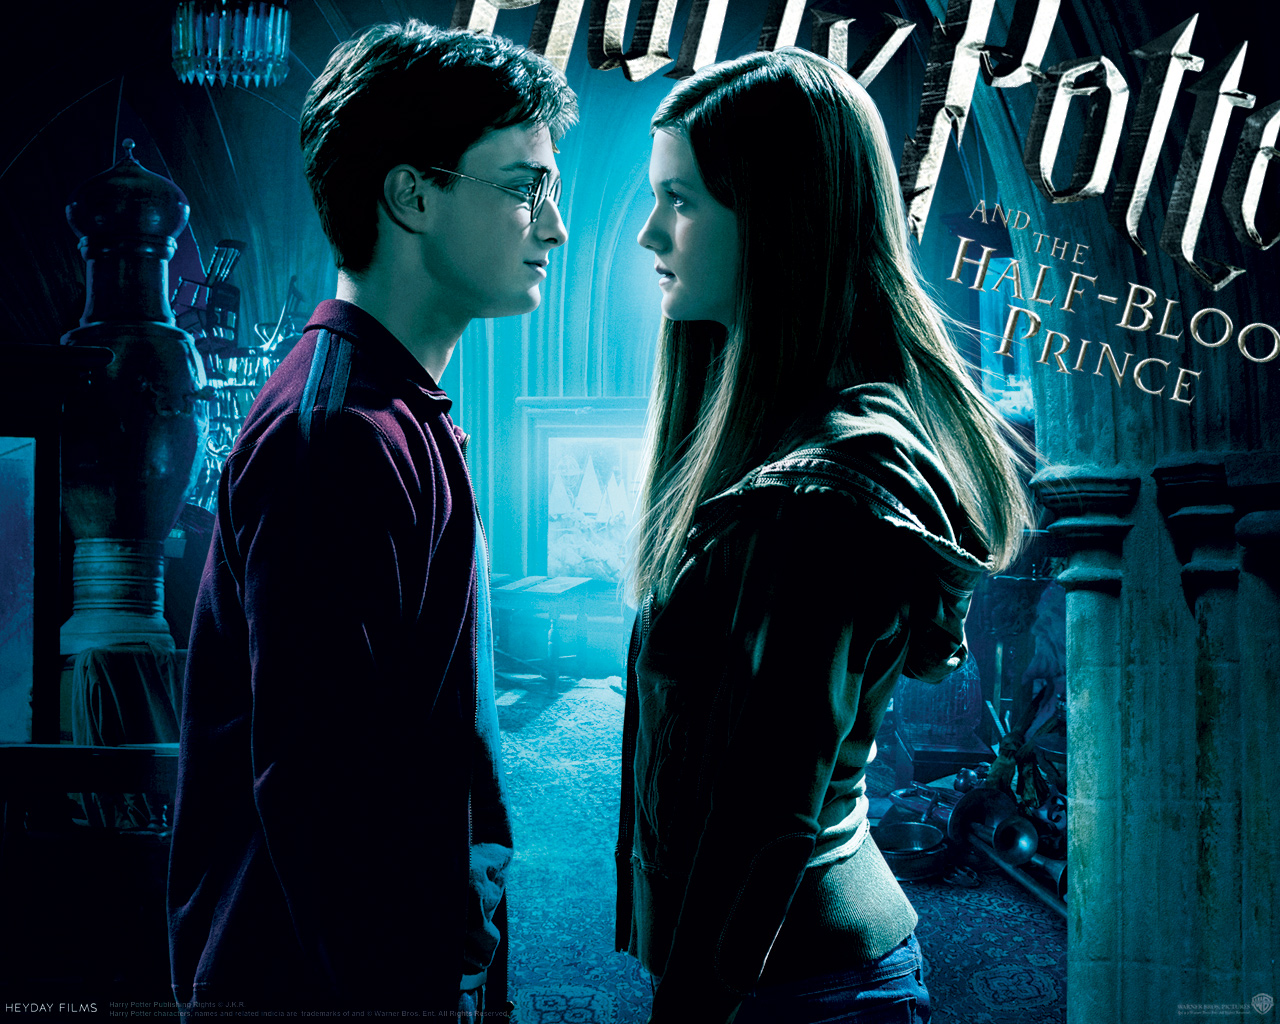 hd wallpapers of harry potter,movie,poster,darkness,fictional character,scene